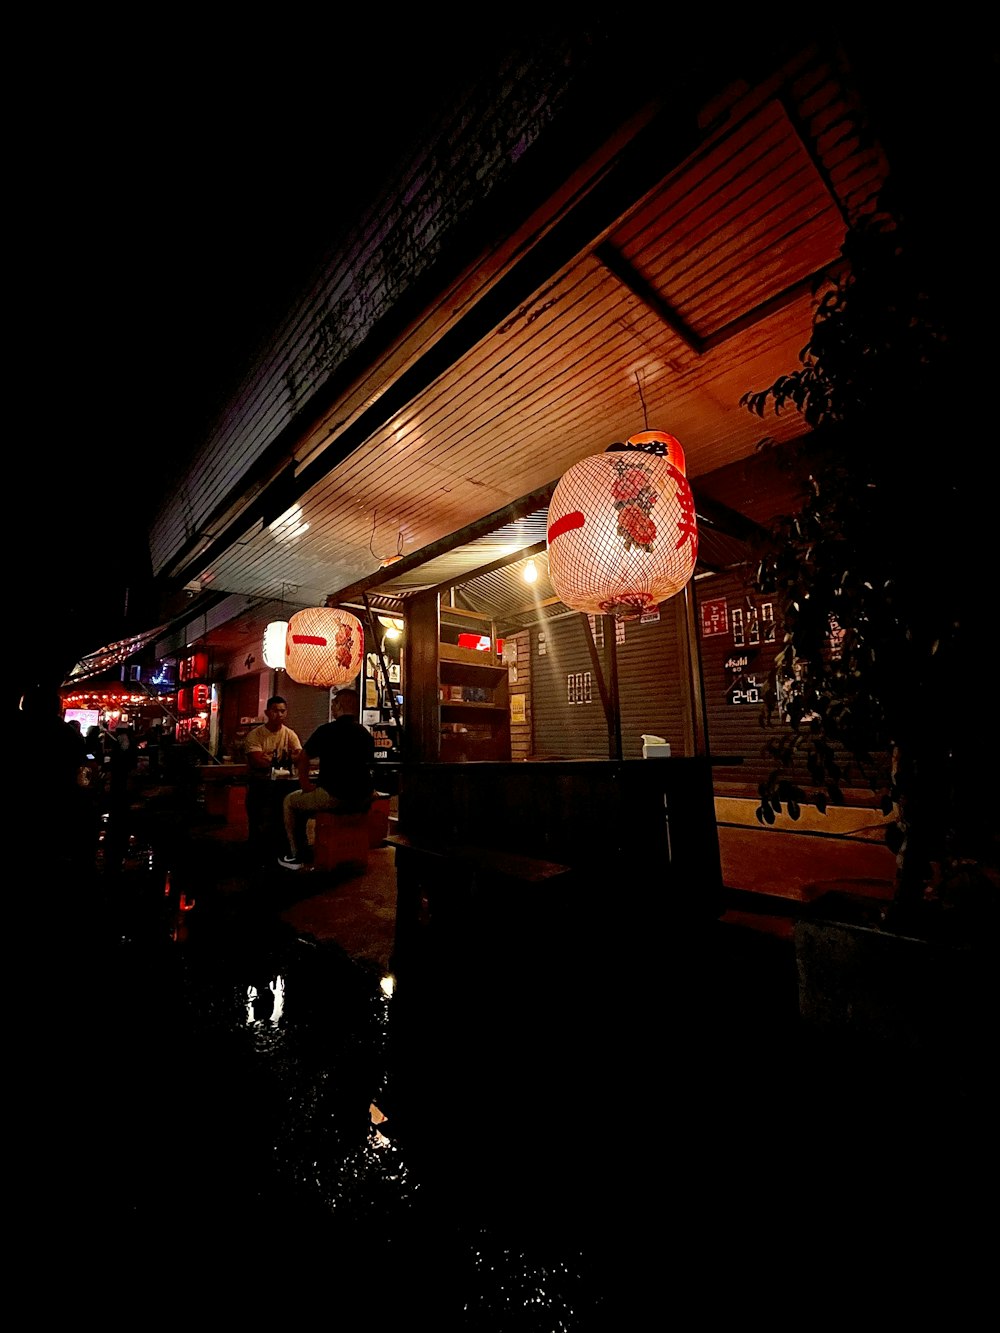 a restaurant at night with lanterns hanging from the roof